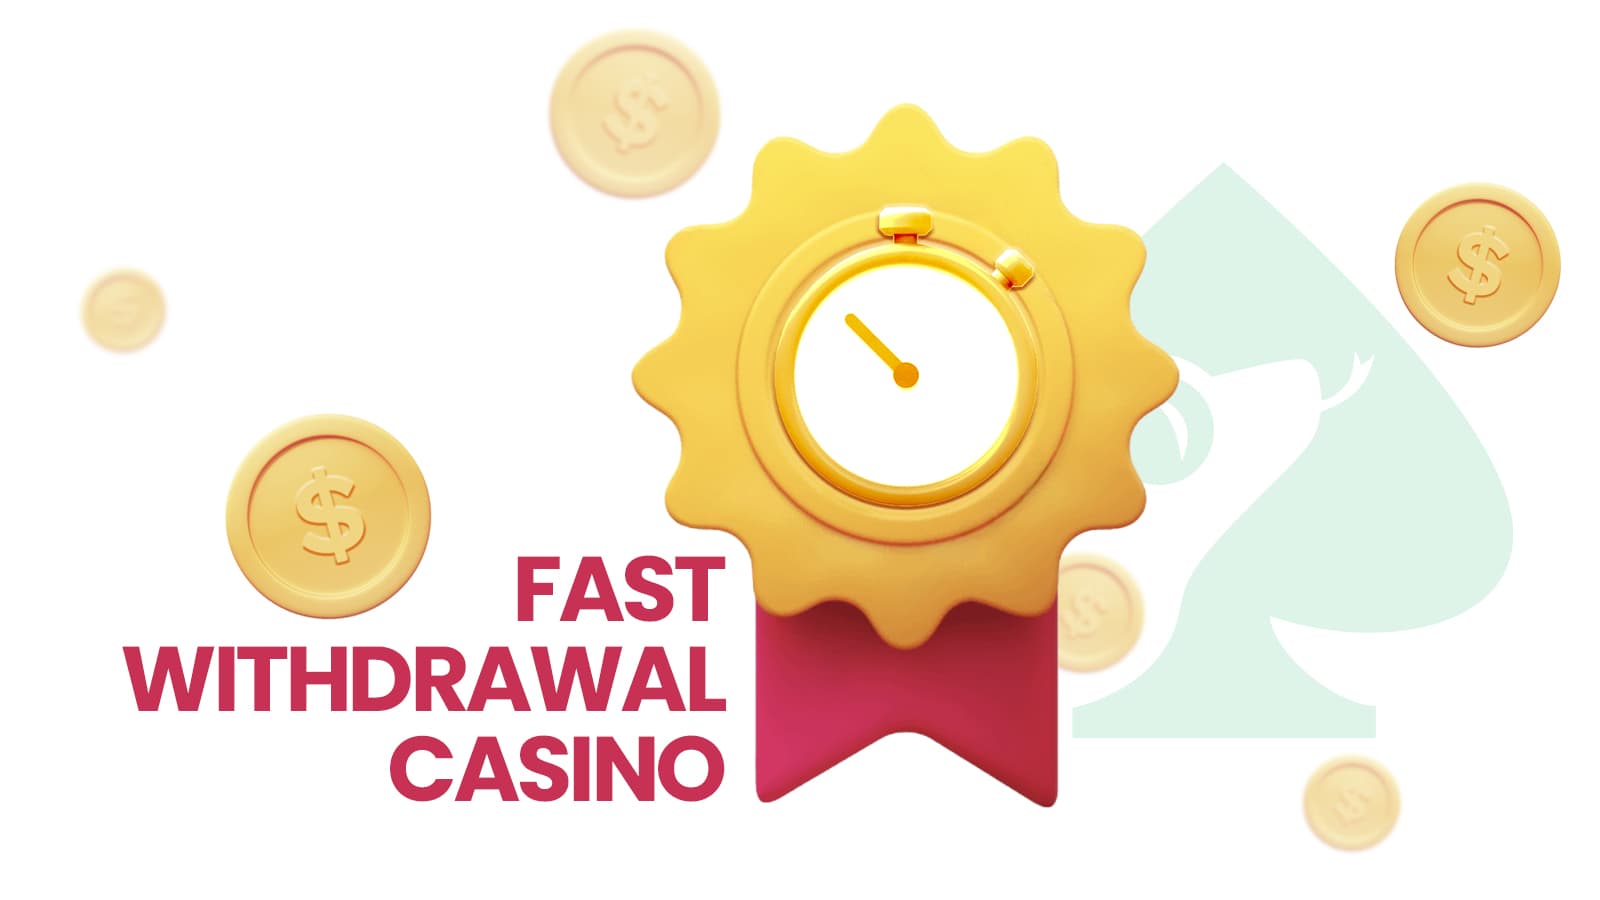 Fast withdrawal casino payments